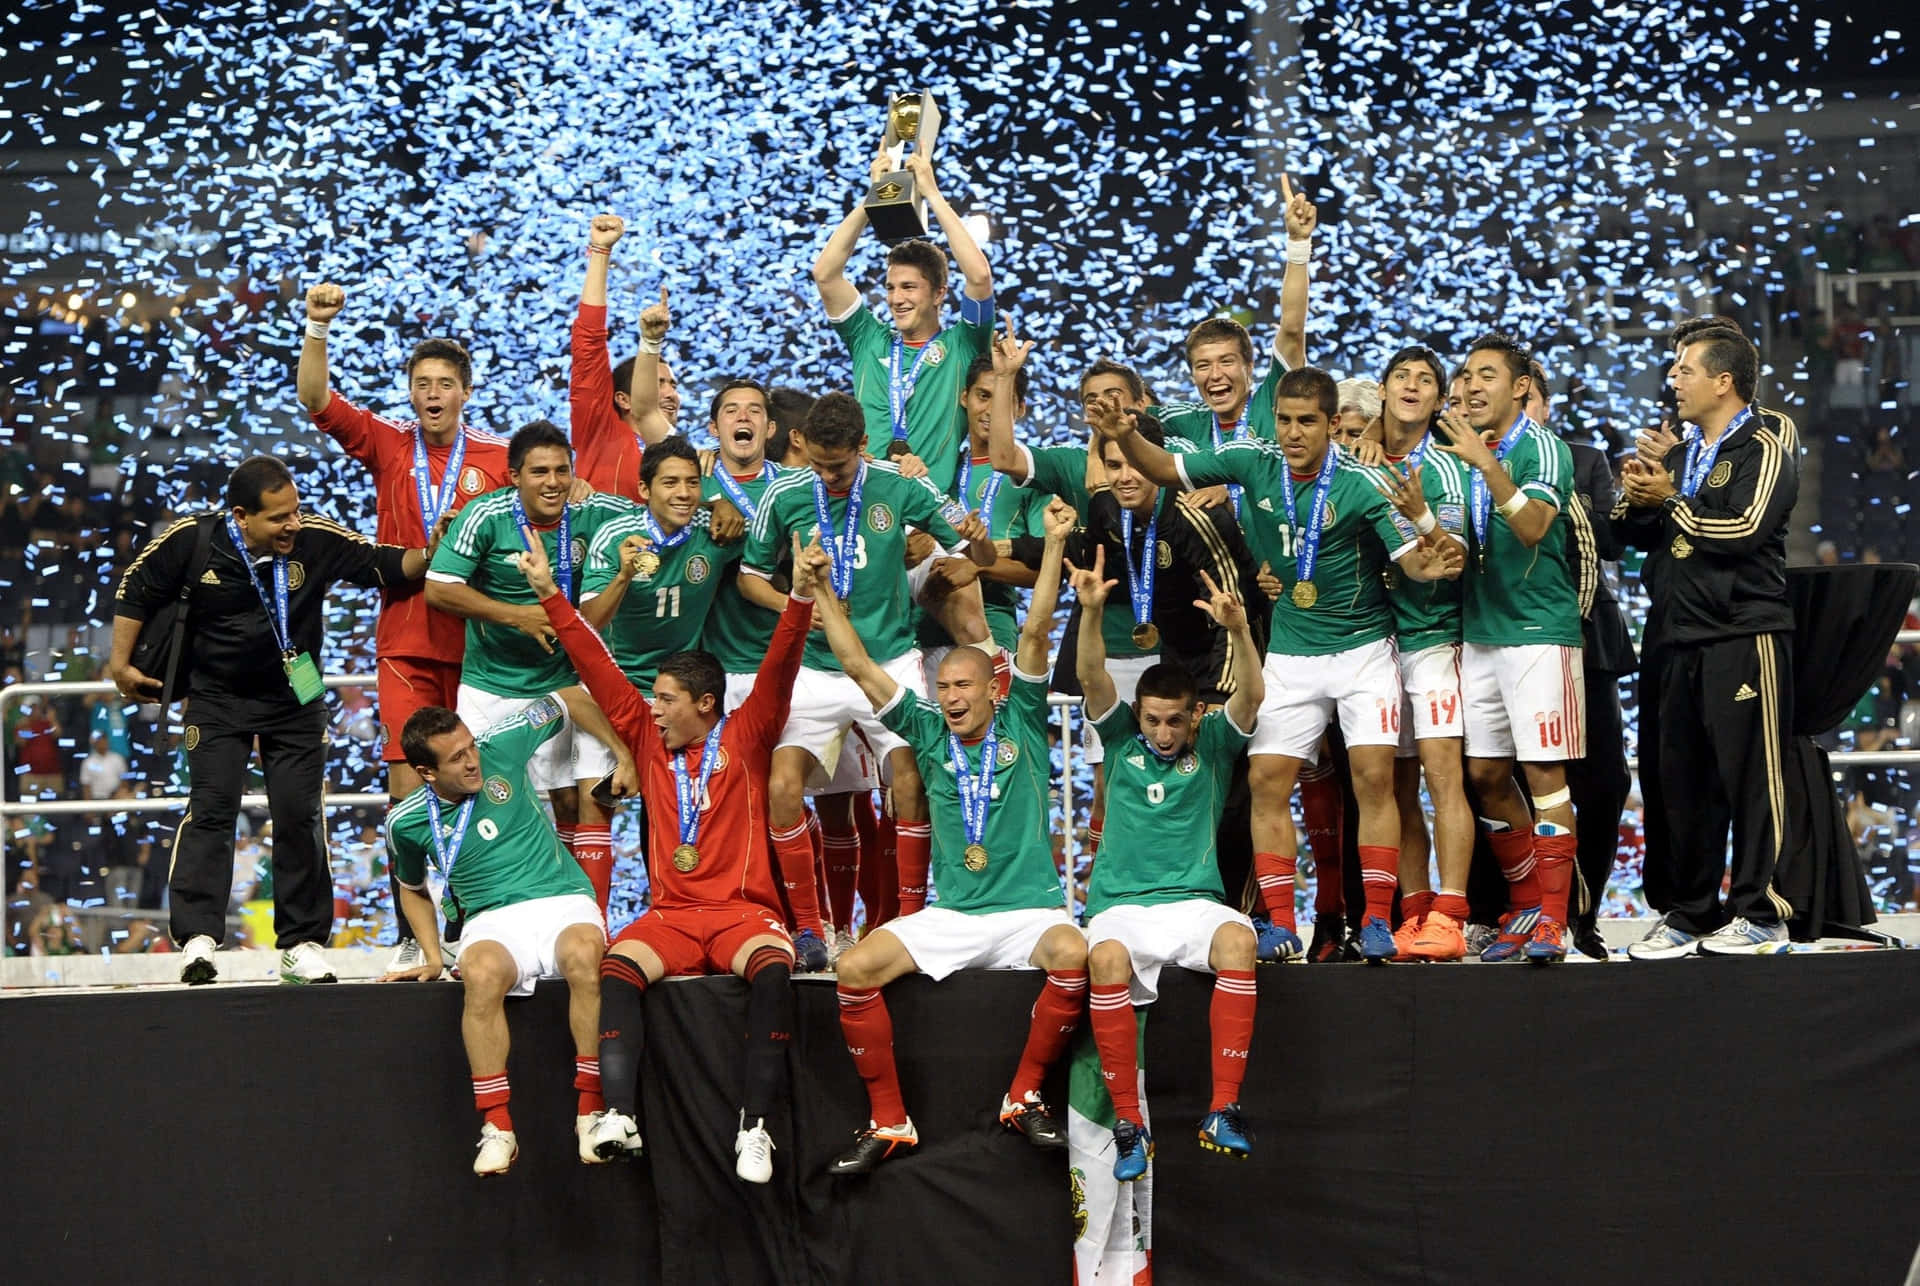 The Mexican national soccer team proudly poses for a picture before an international match. Wallpaper